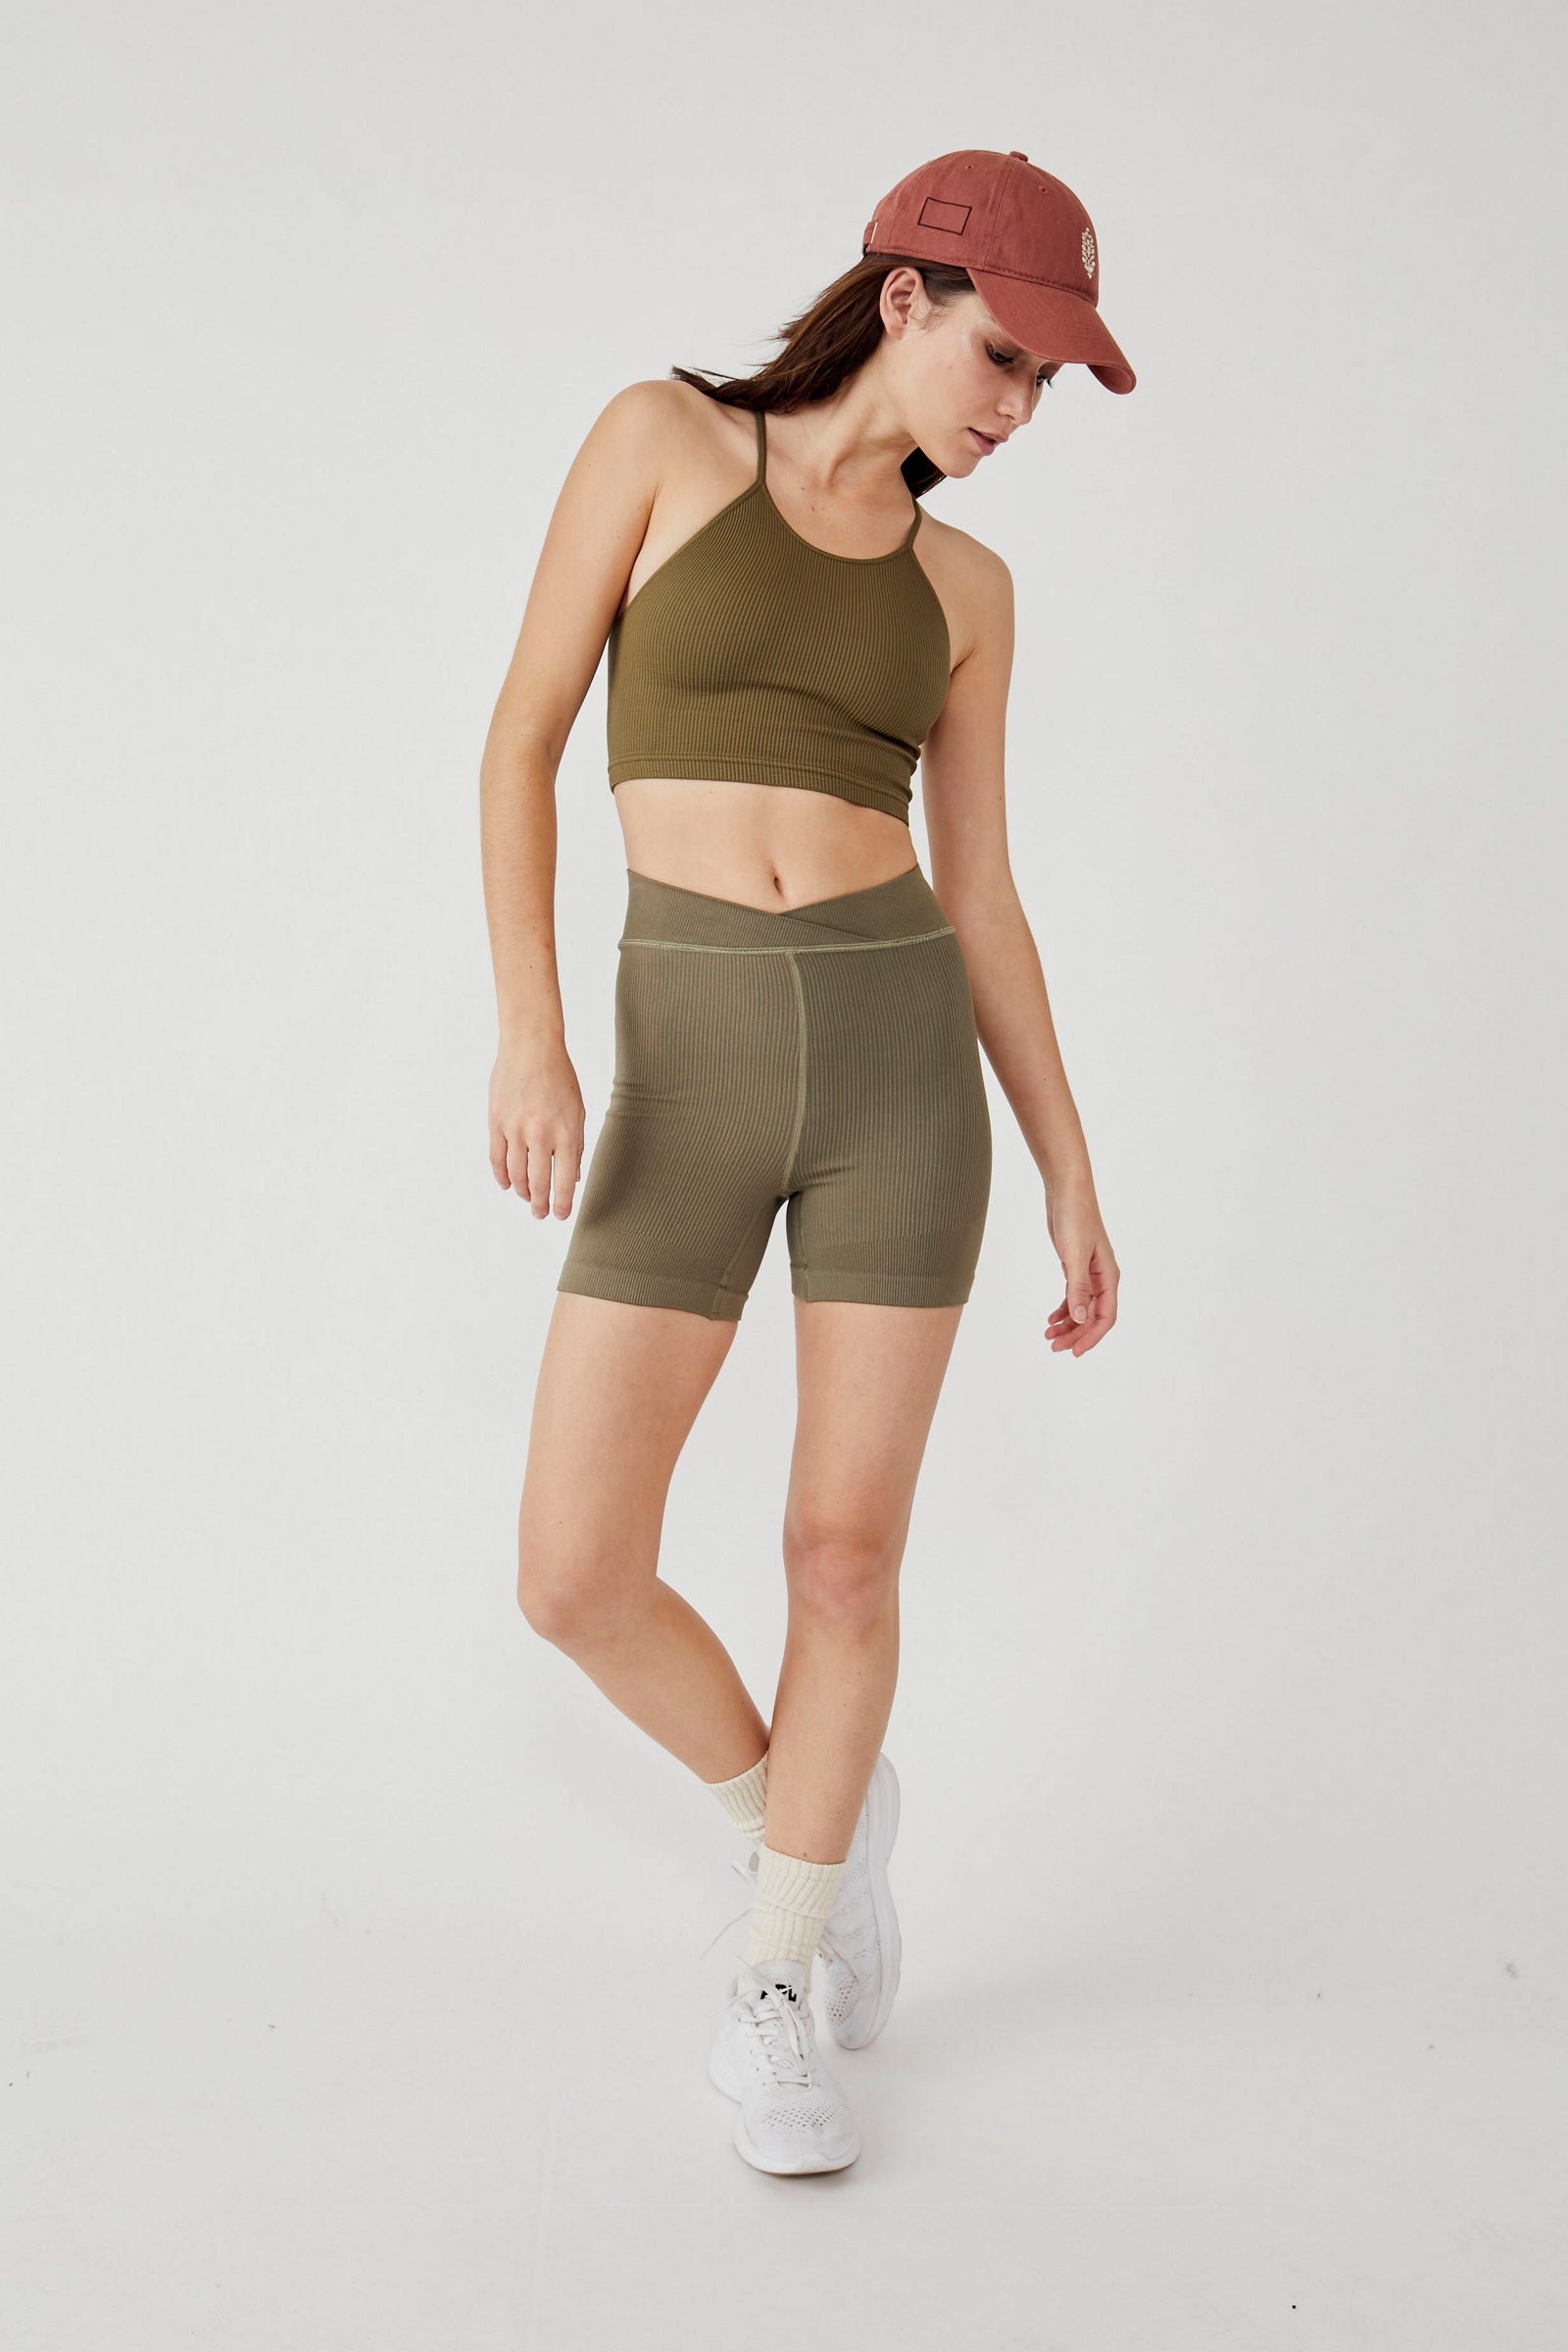 FREE PEOPLE FREE THROW SHORT IN ARMY